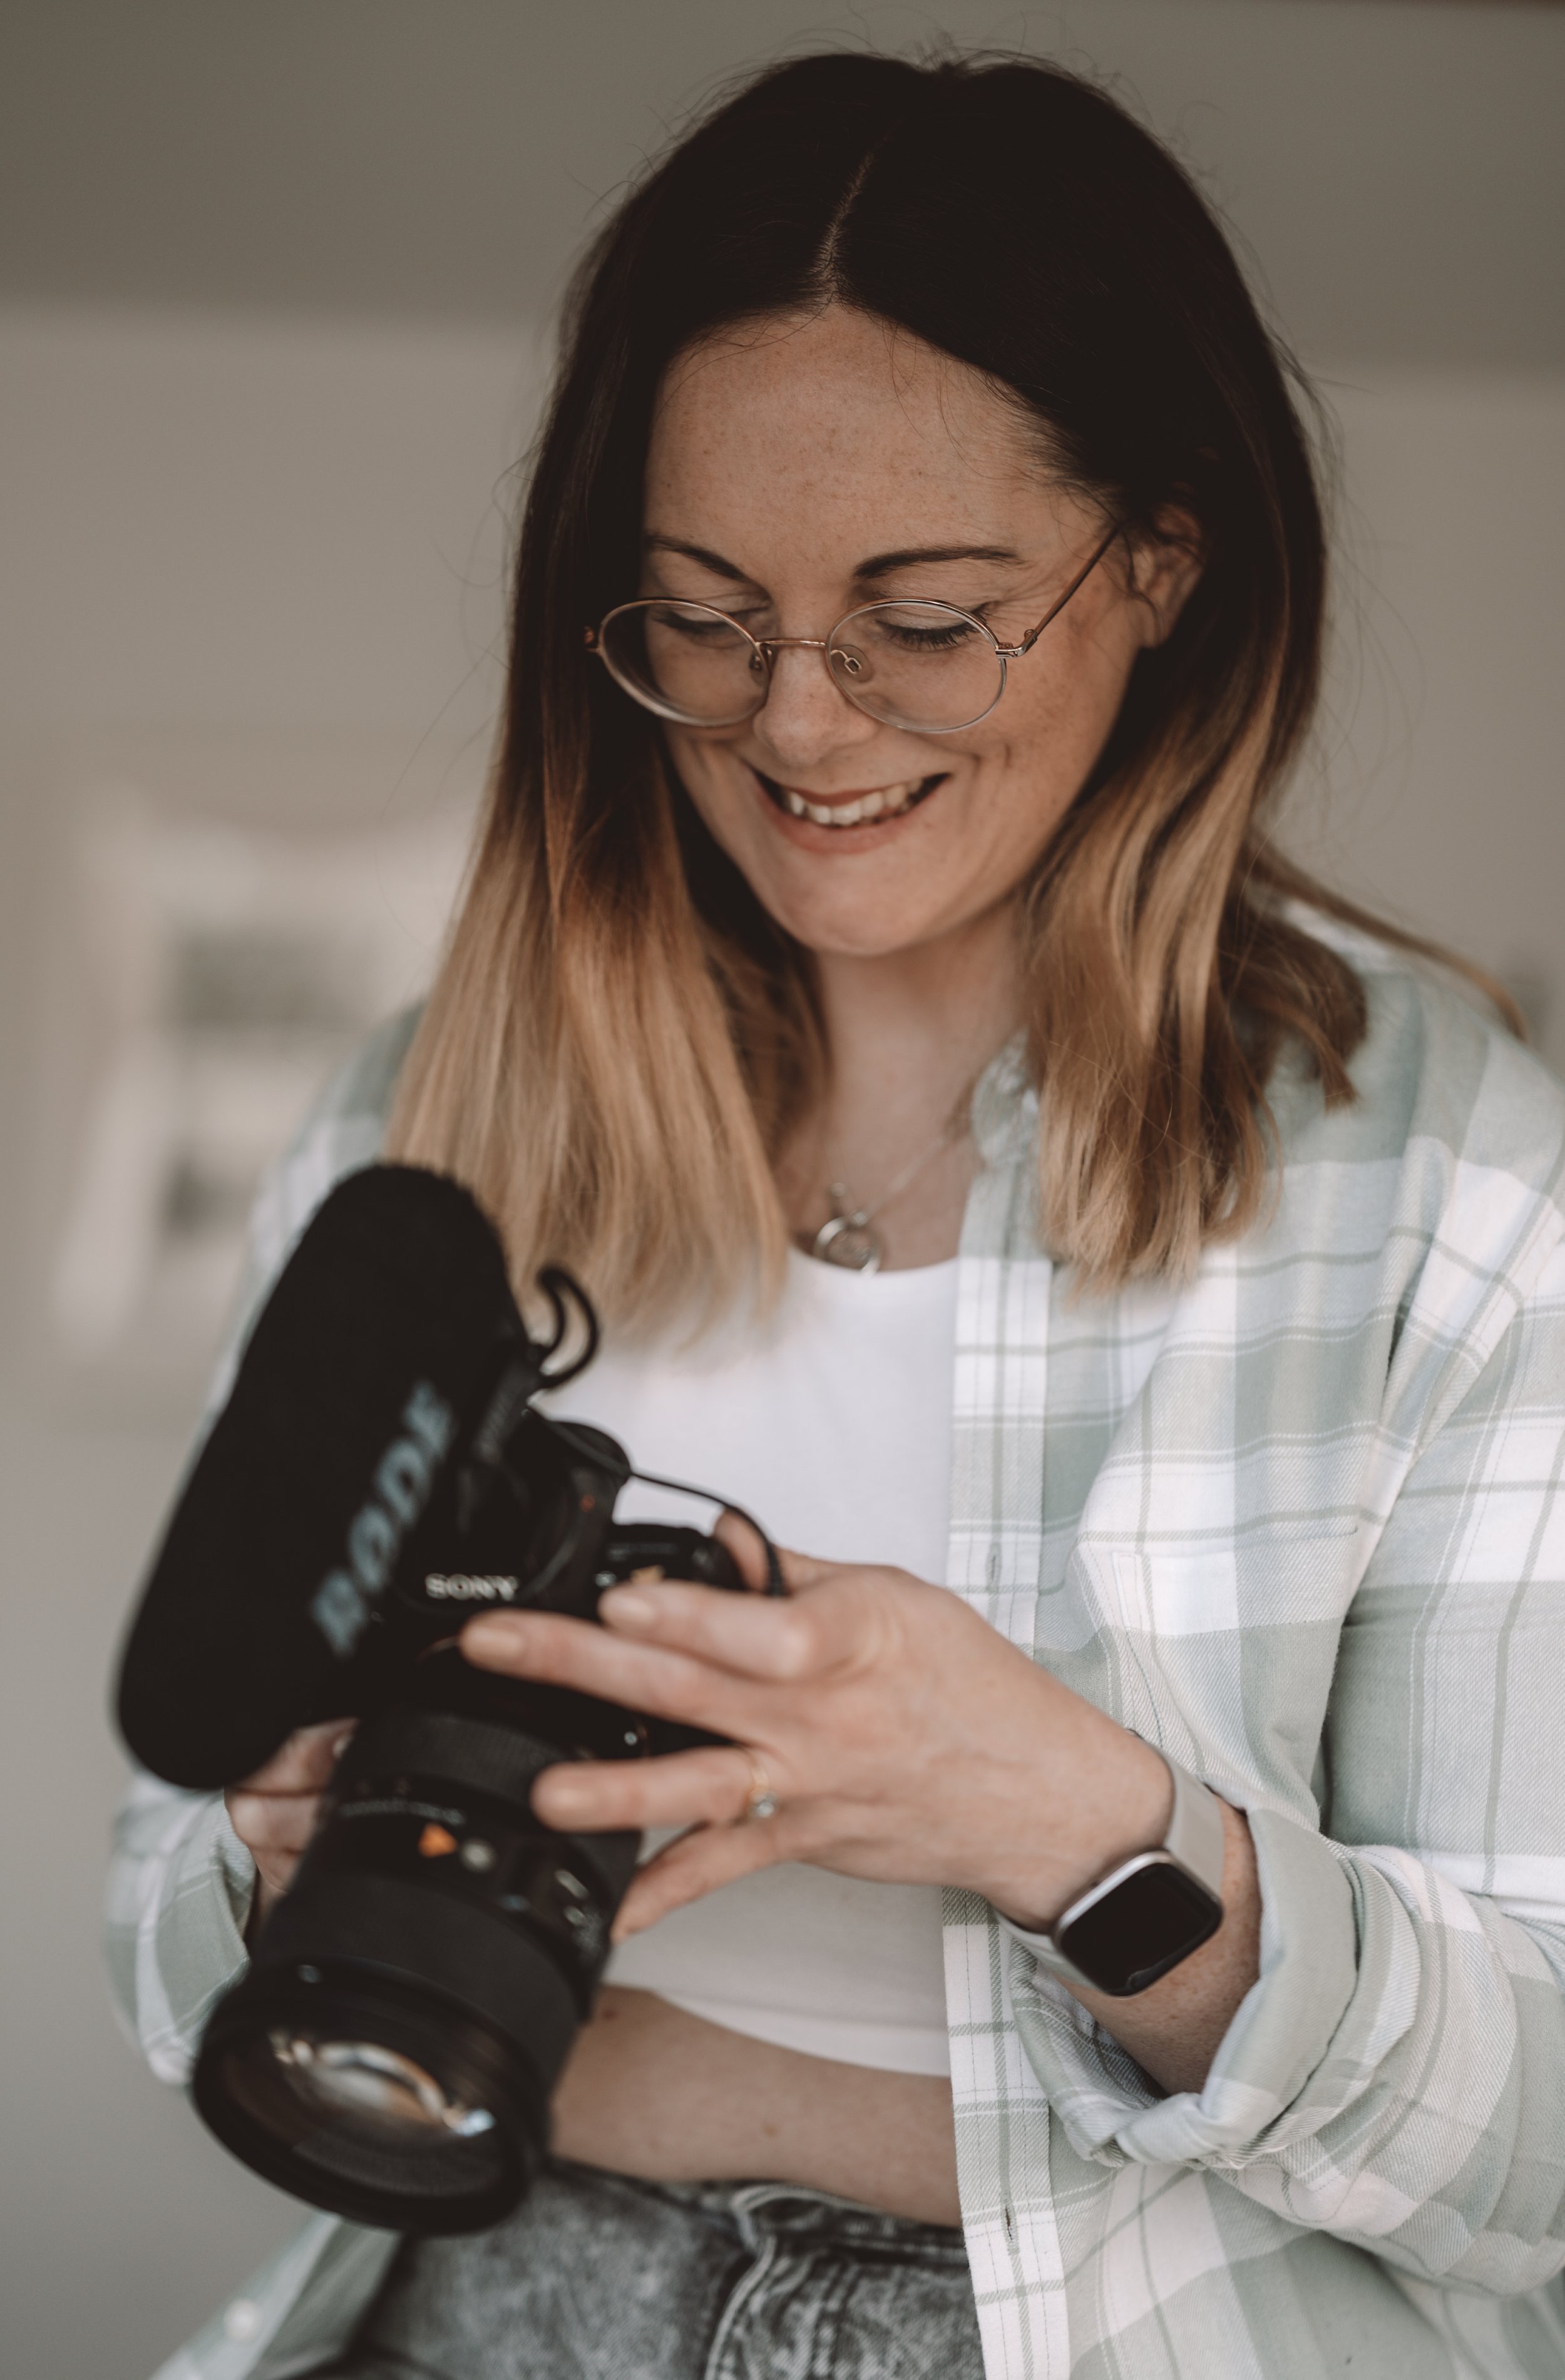 Photo of Sally Johns, a wedidng videography. She is a young woman with long brown hair wearing casual clothes. She is looking at the back of a video camera while smiling.